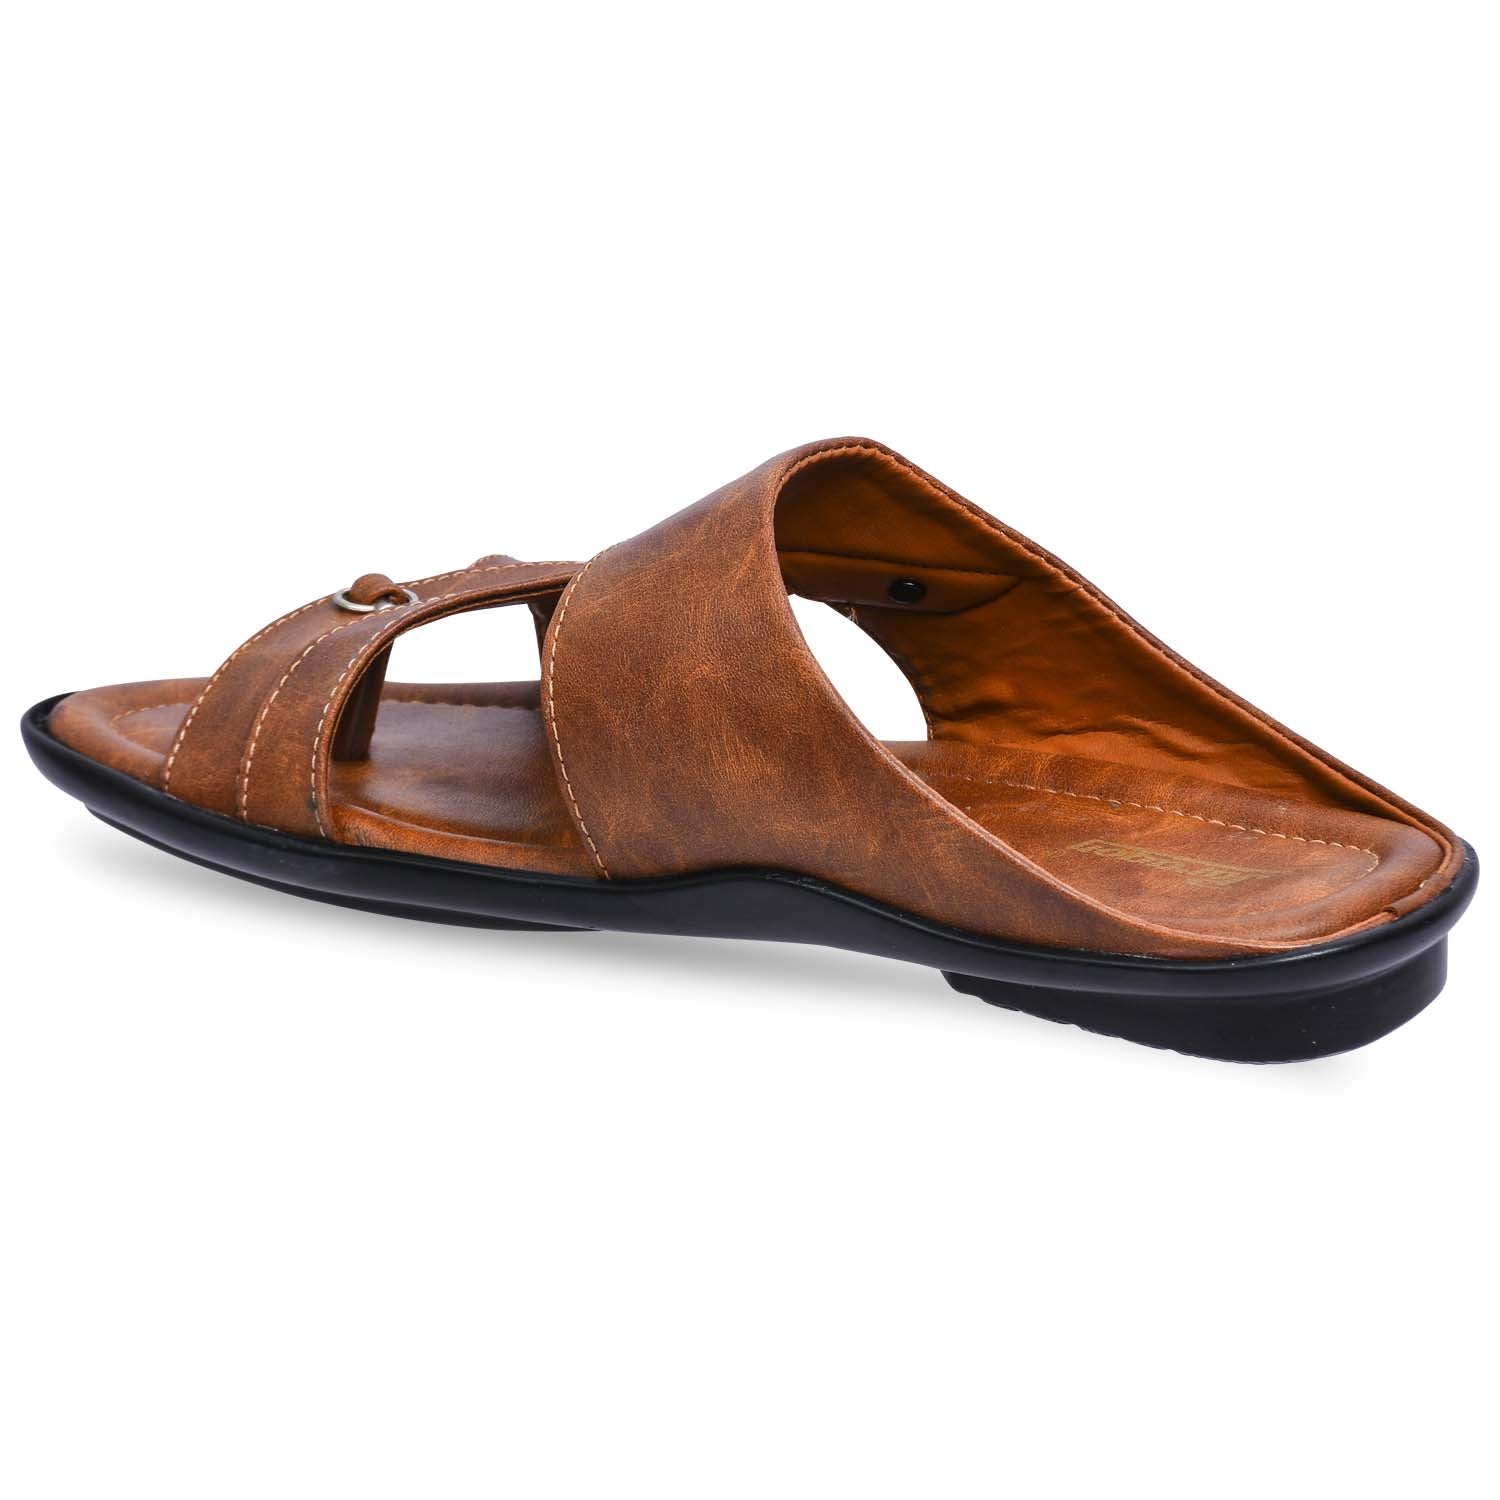 Paragon R4002G Men Stylish Sandals | Comfortable Sandals for Daily Outdoor Use | Casual Formal Sandals with Cushioned Soles